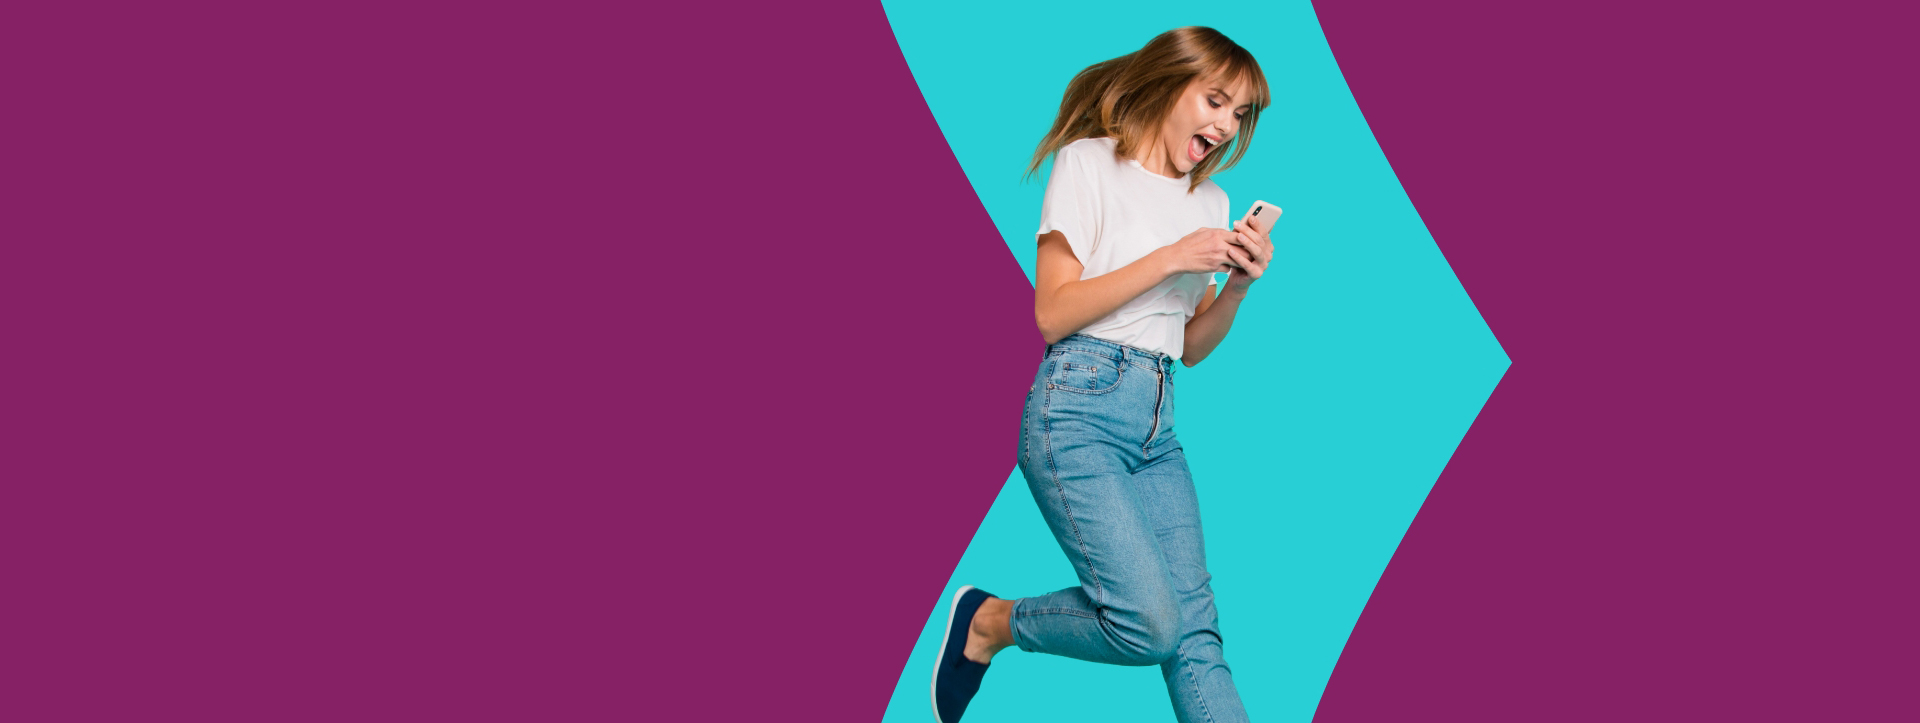 Excited lady, looking at her phone, about Skrill digital wallet benefits, brand with purple background